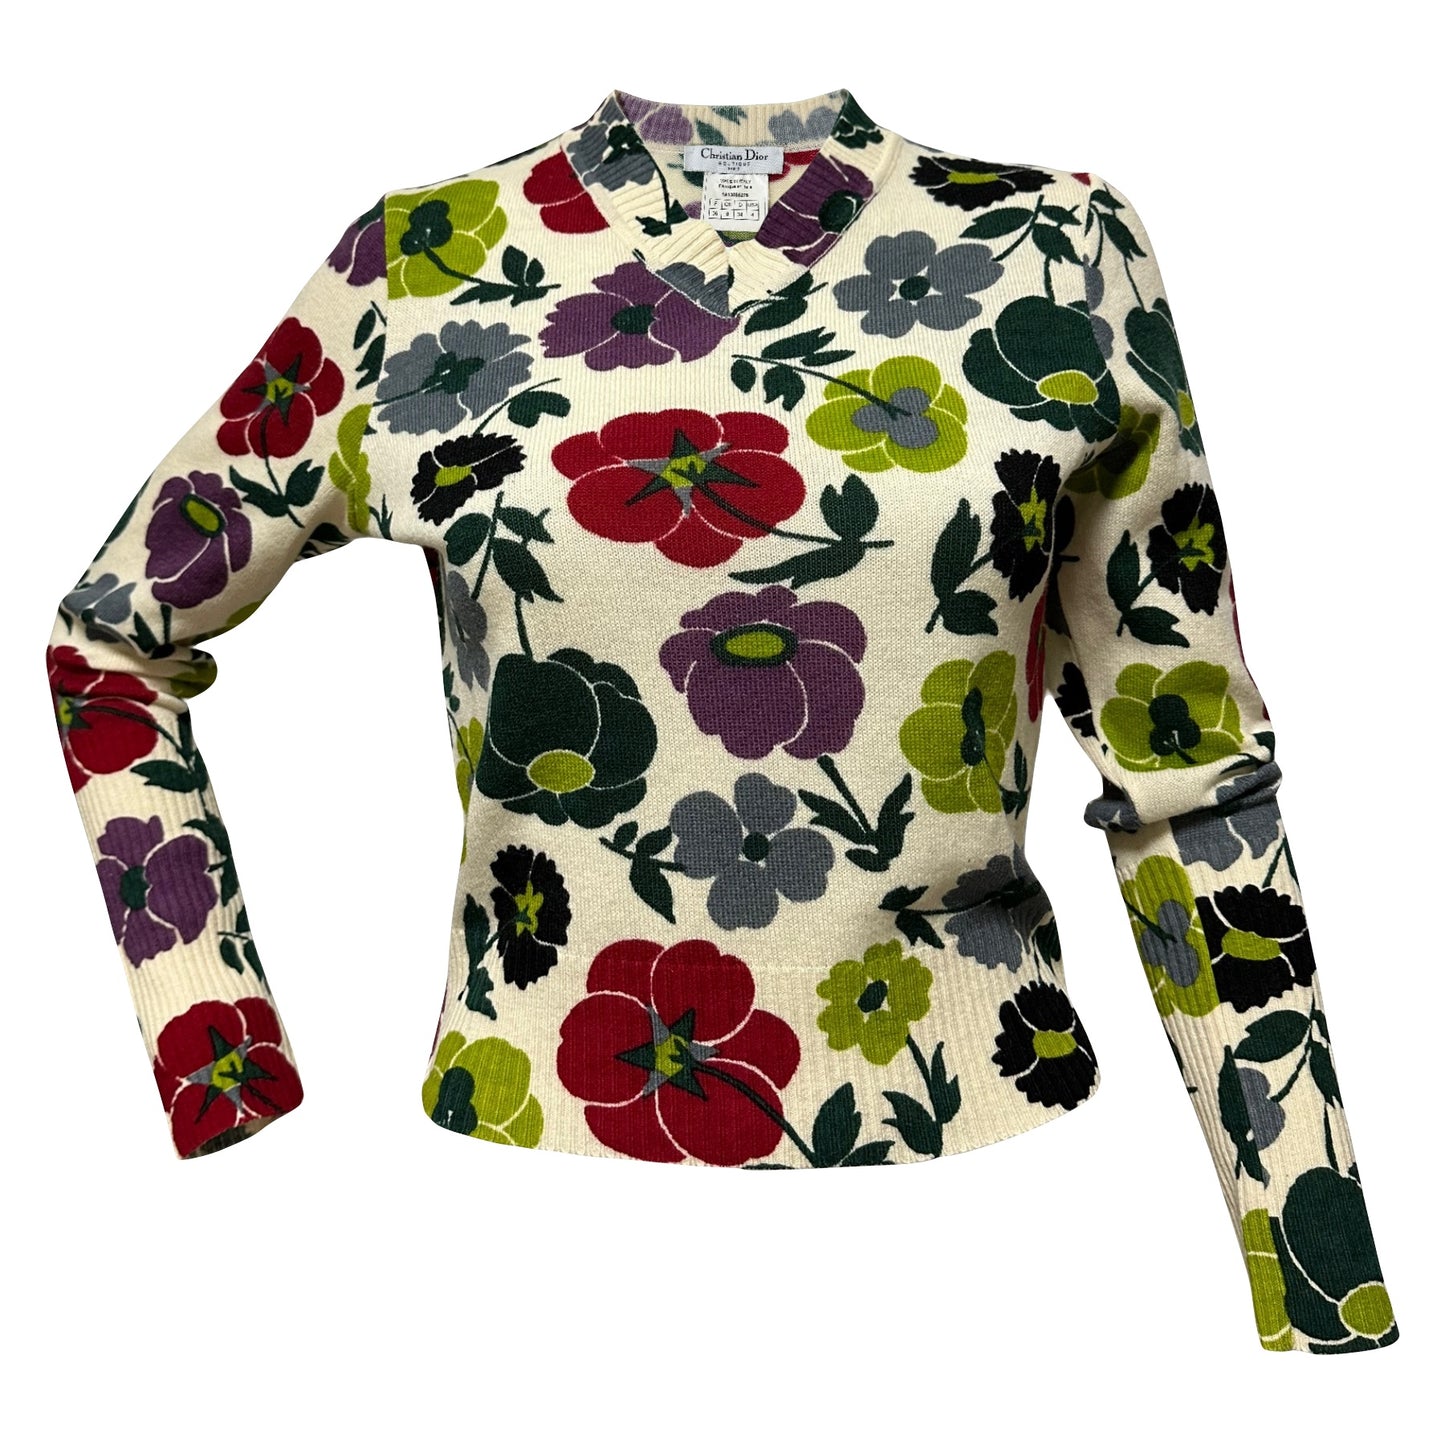 CHRISTIAN DIOR Fall Winter 2001 V-neck Floral Print Knit Sweater